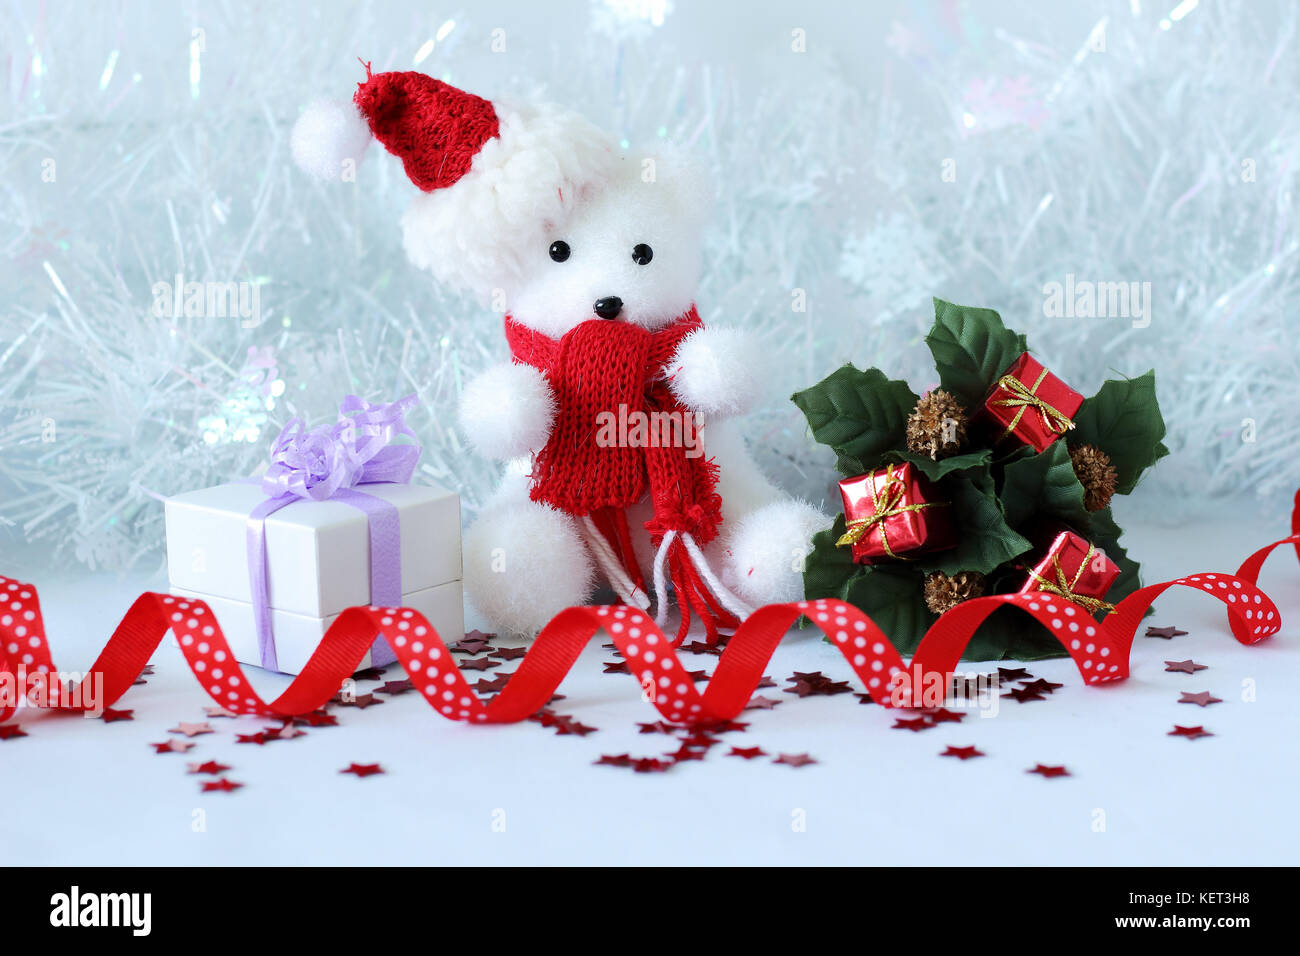 gifts with shiny bows on a Christmas party decor Stock Photo